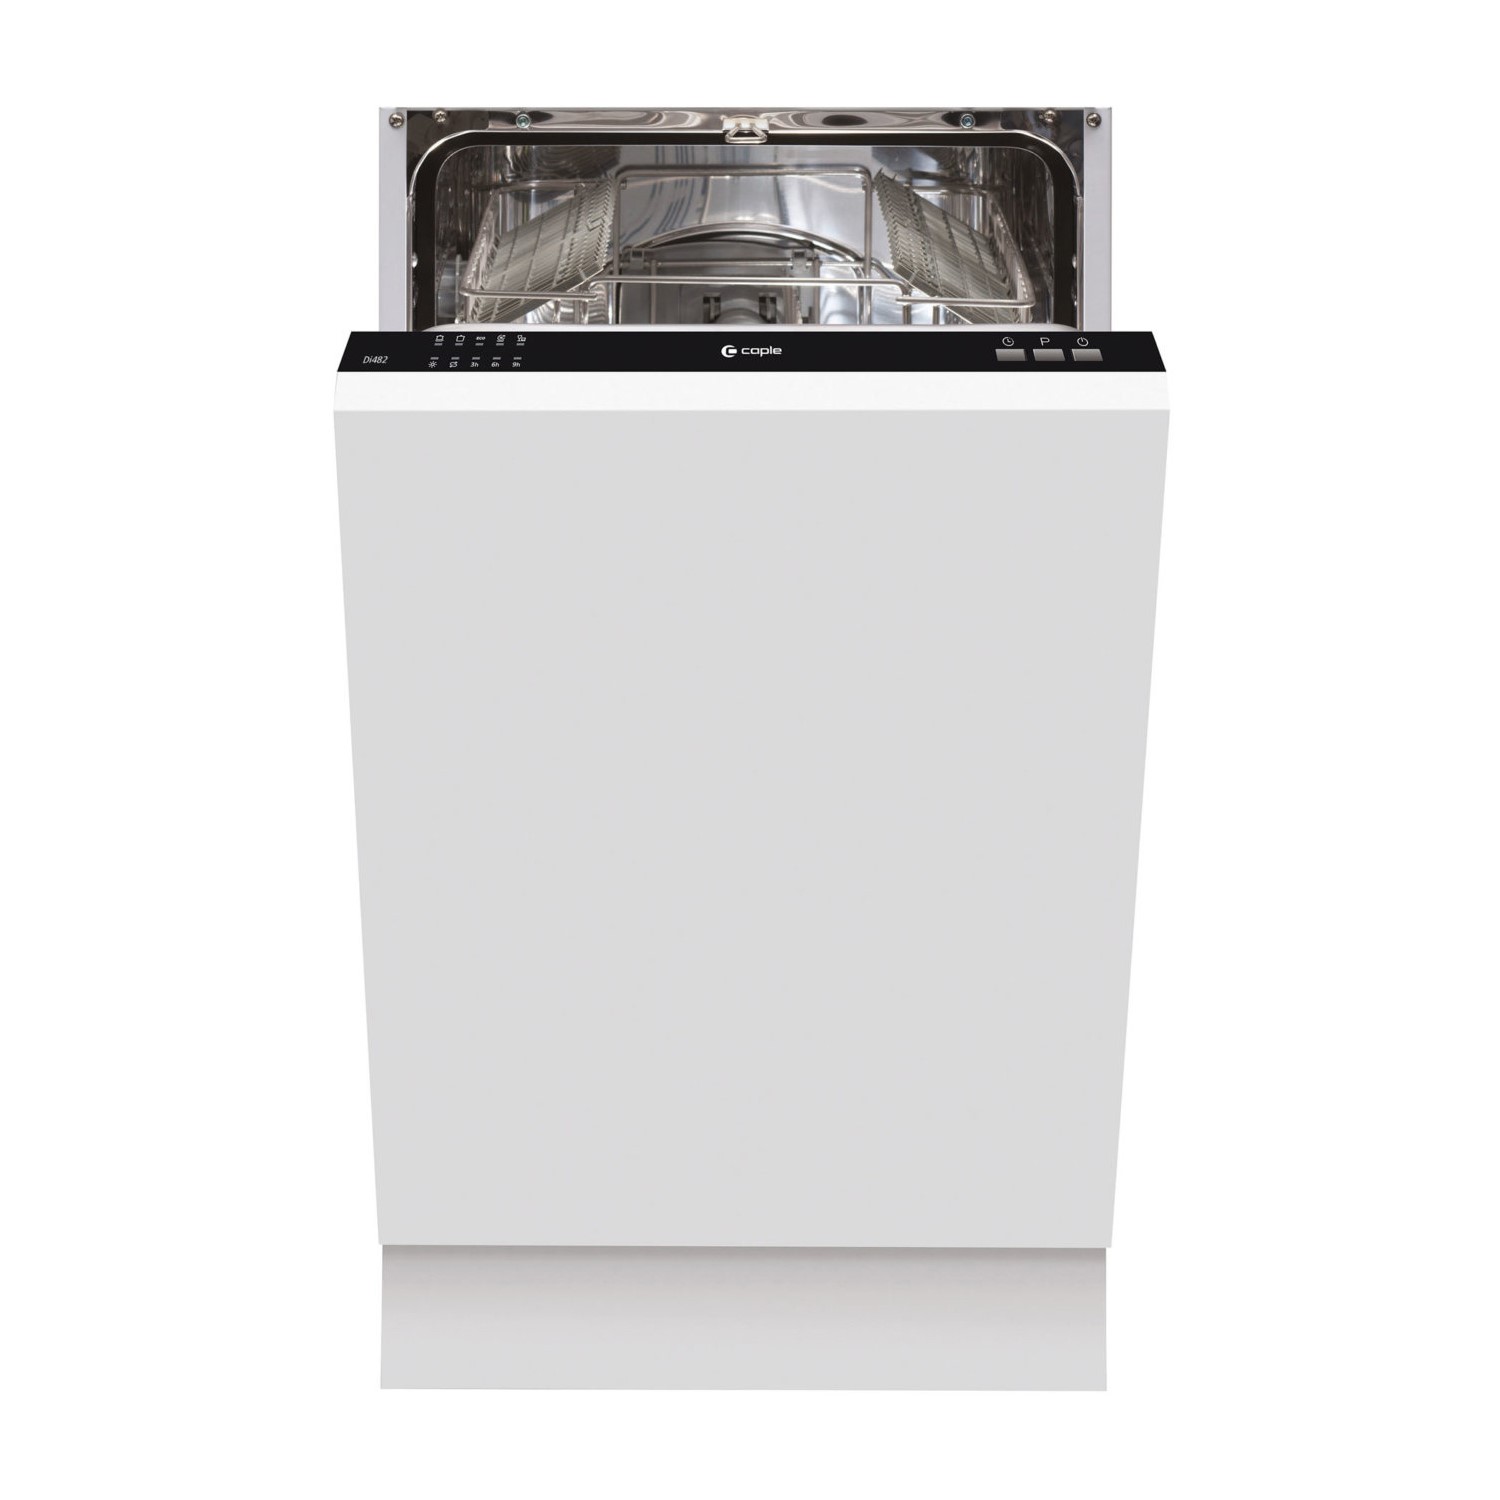 Caple 9 Place Settings Fully Integrated Dishwasher